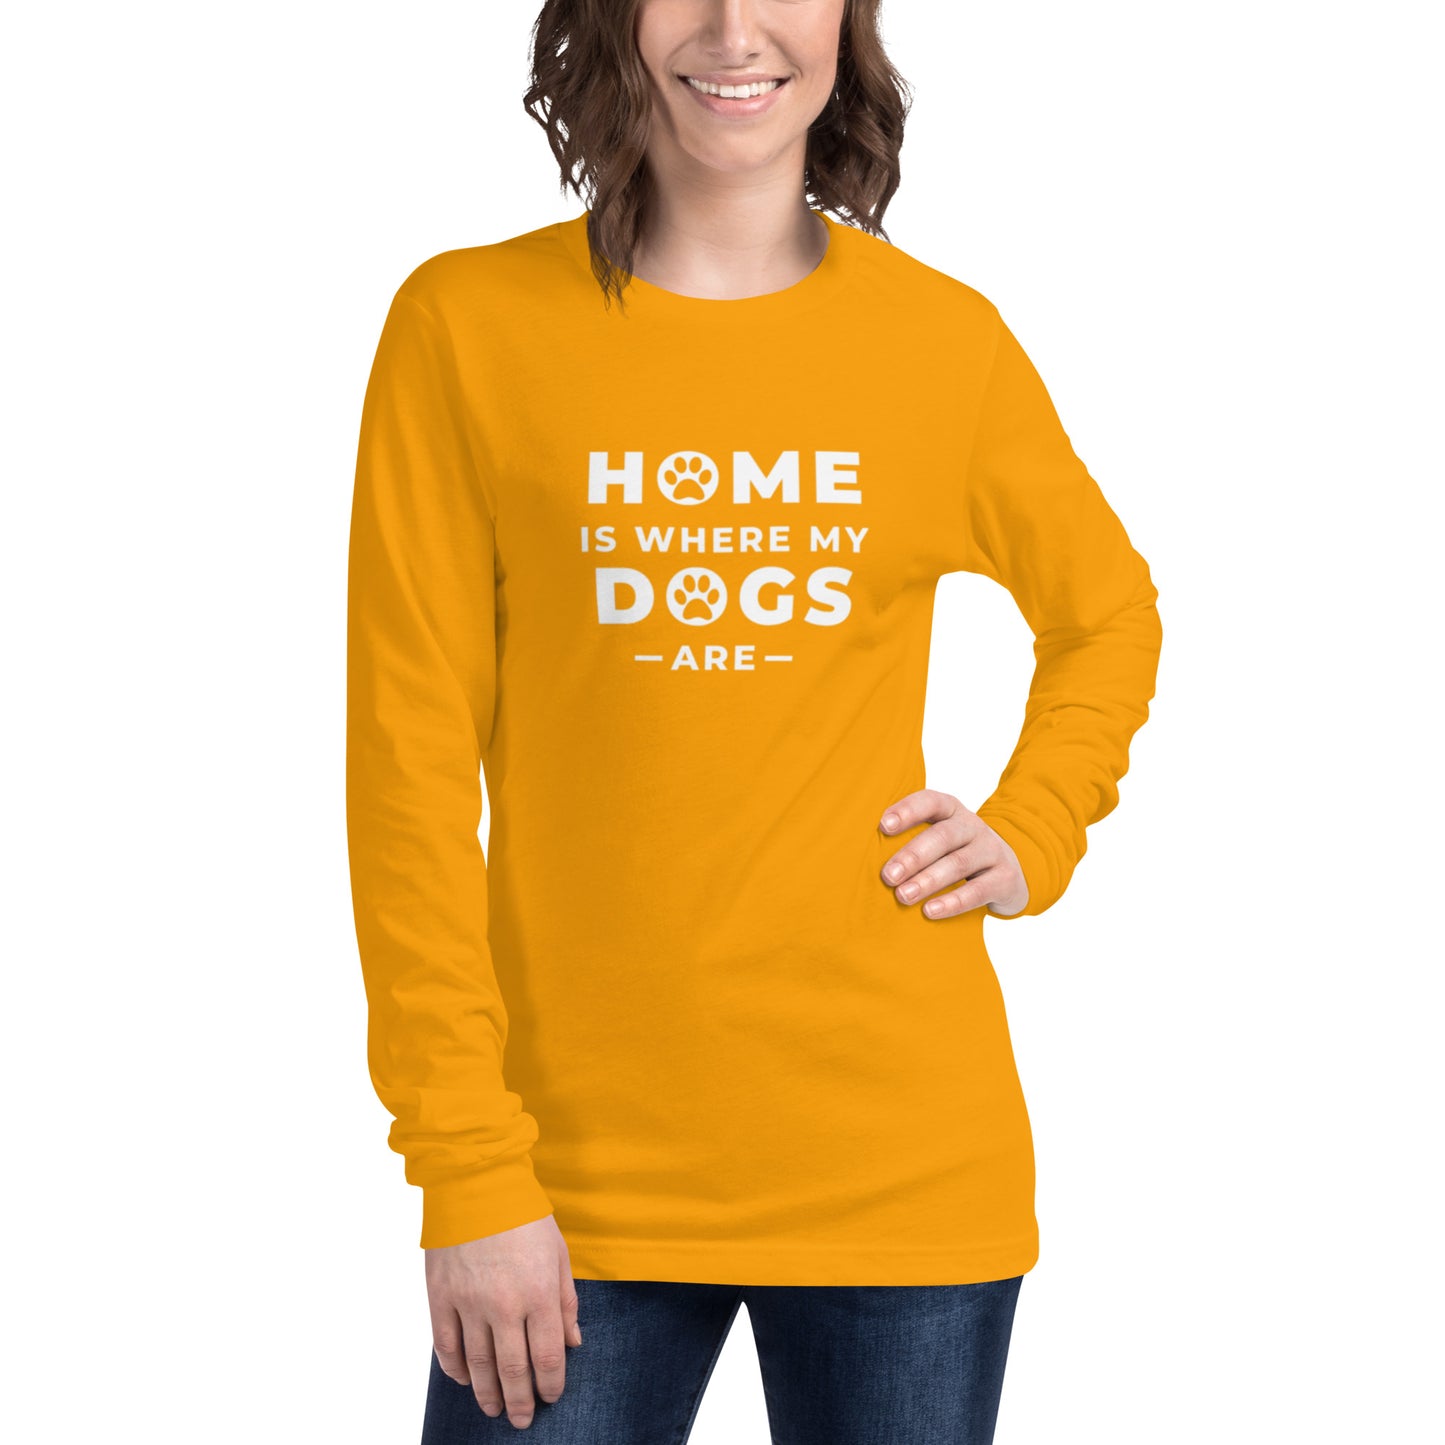 Unisex Long Sleeve Tee with print "Home is where my dogs are"